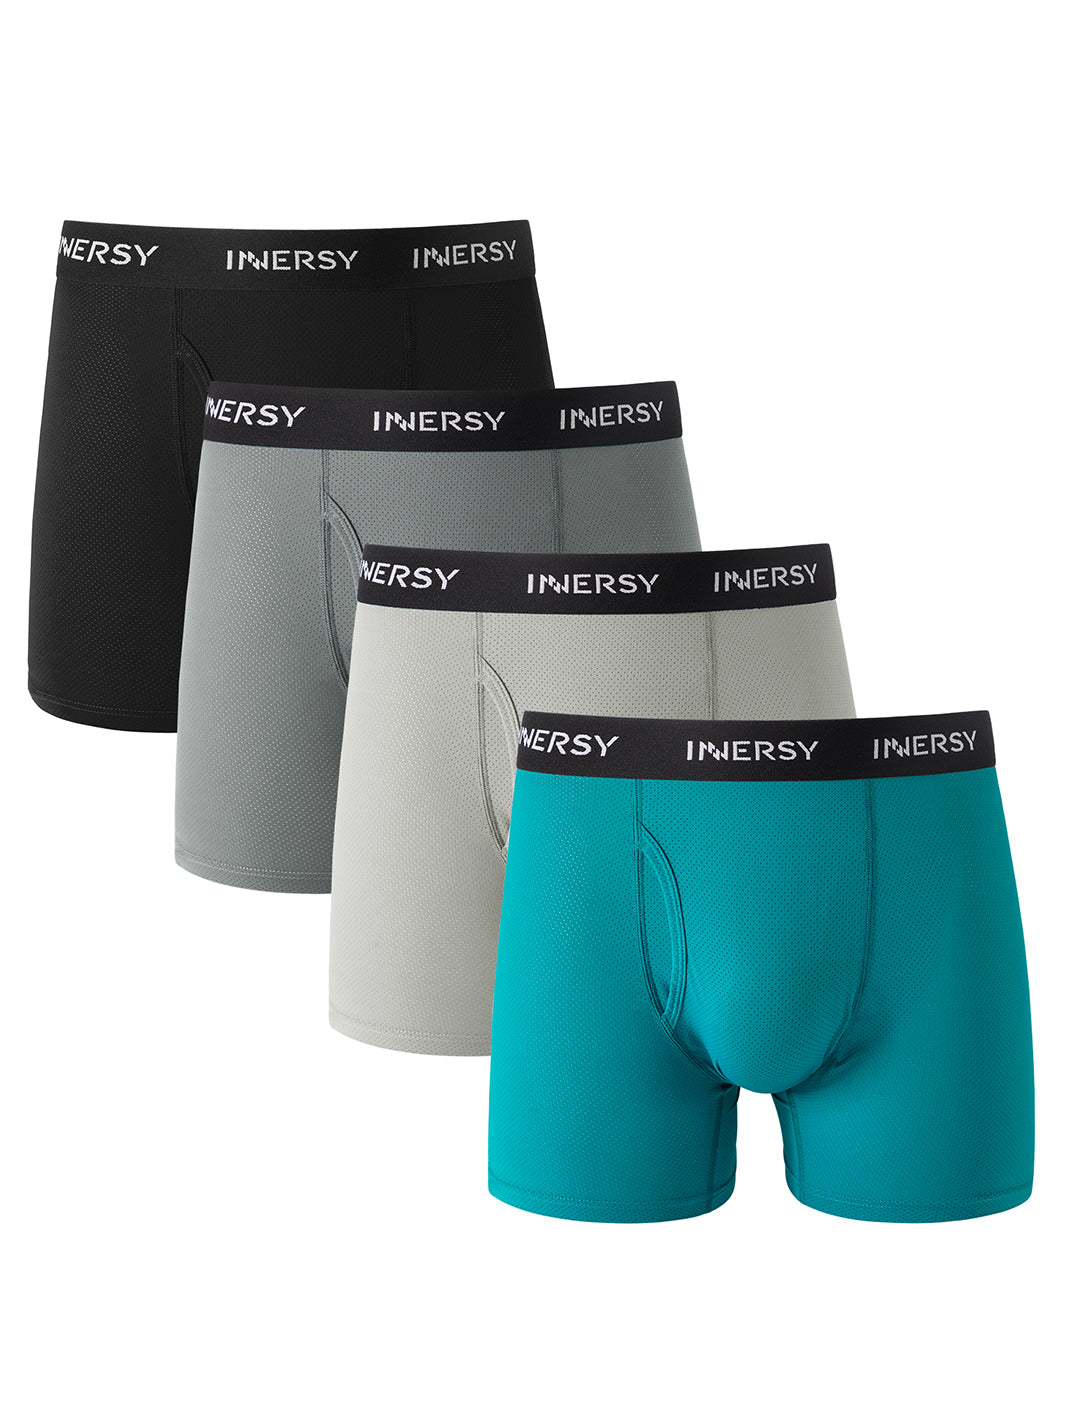 INNERSY INNEERSY Womens Briefs Breathable Cotton Underwear Sets Sports  Stripe Panties Pack of 6 (18 - ShopStyle Knickers